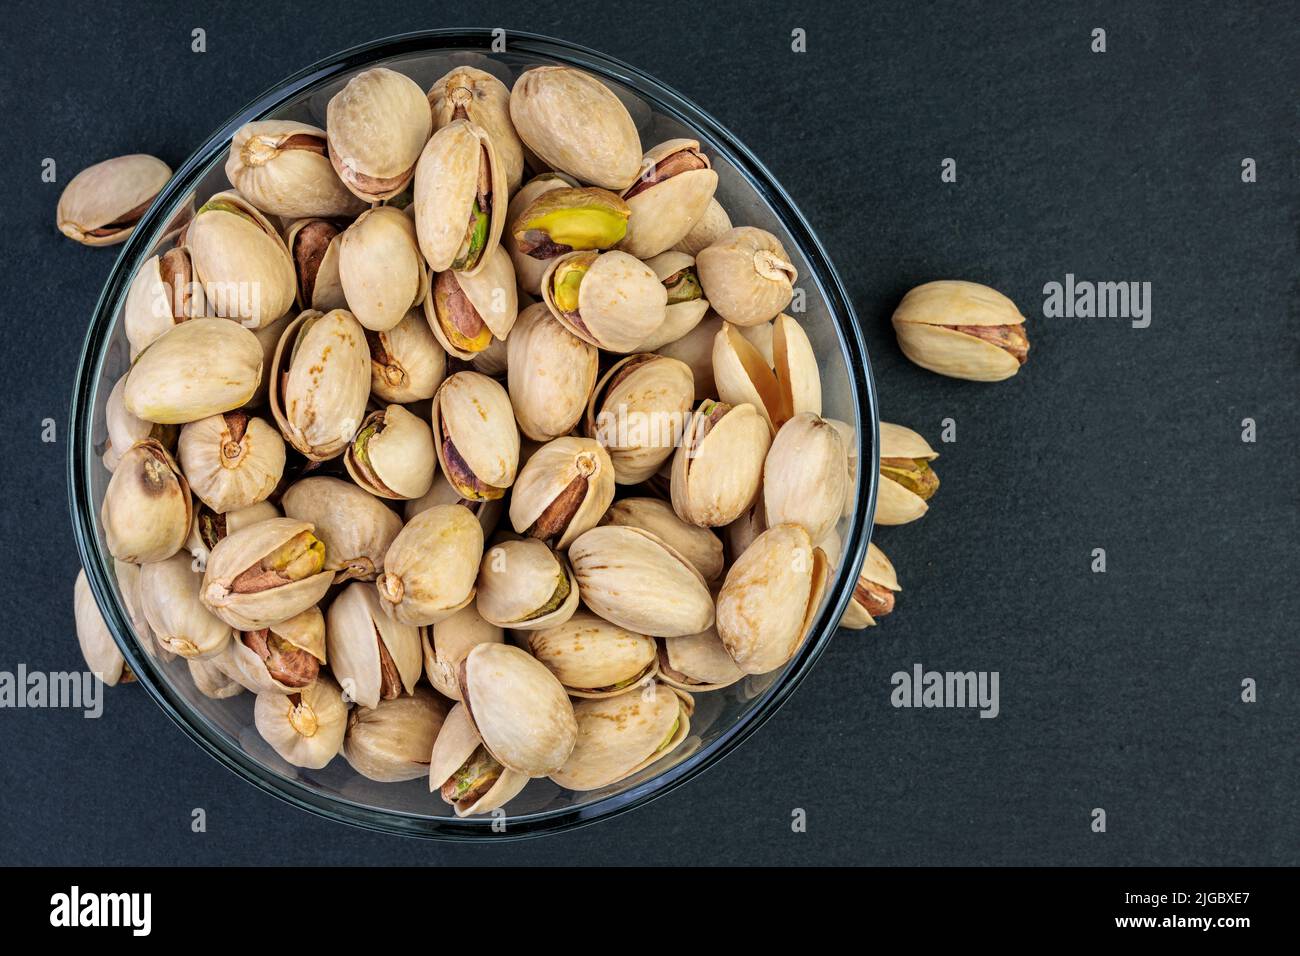 Pistachios in a glass bowl. Stock Photo